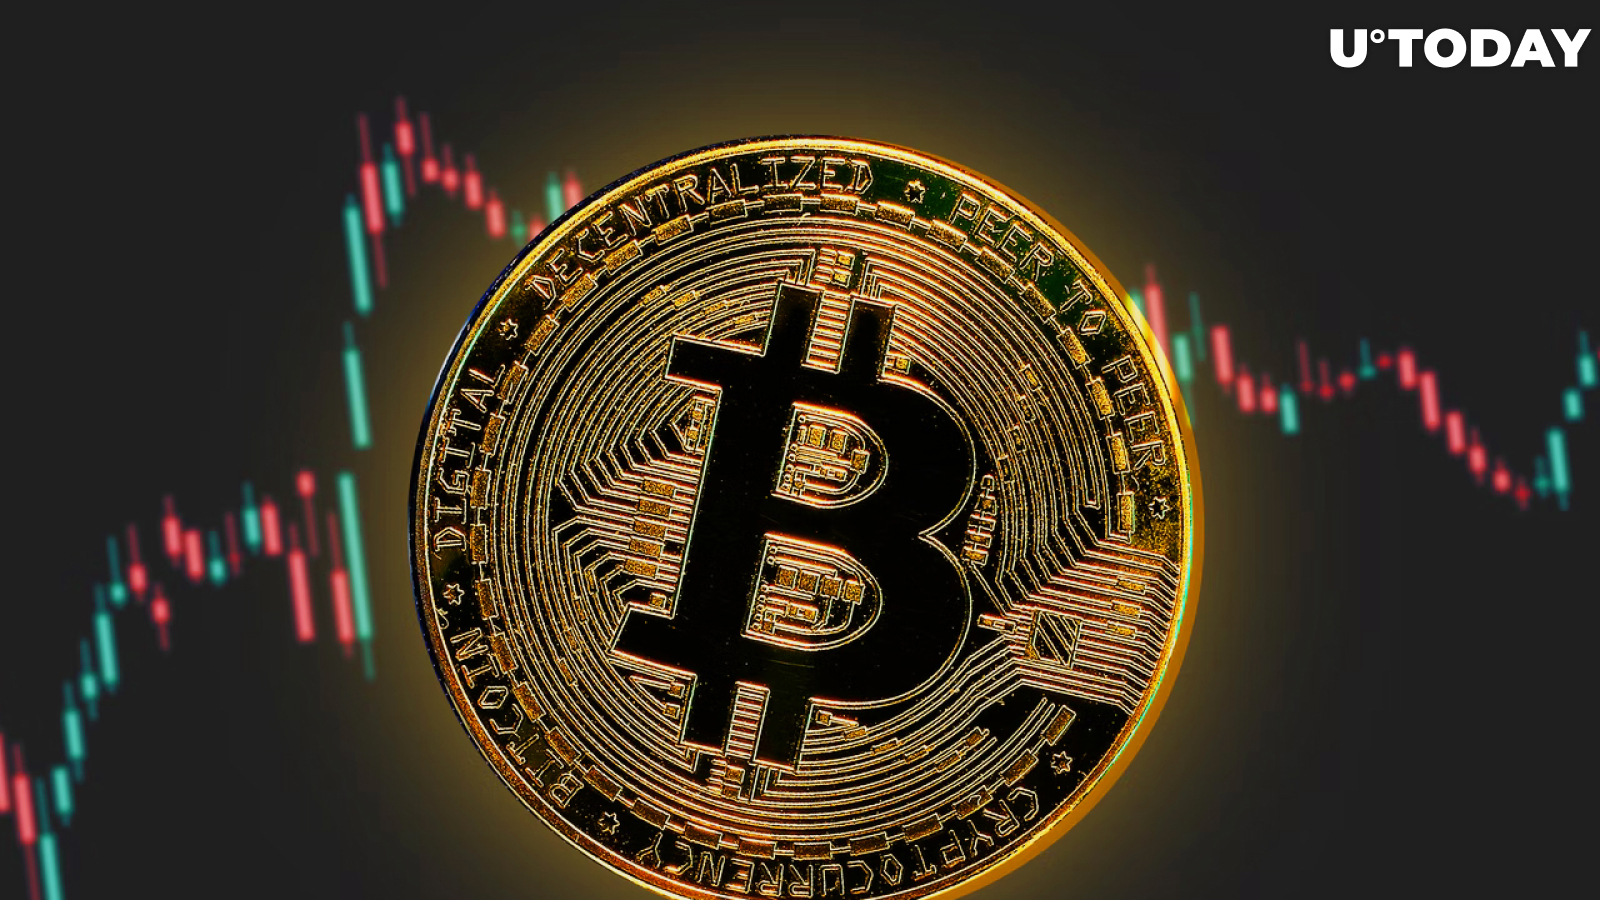 Bitcoin Returns Back Above $21,000 After Falling to $17,000